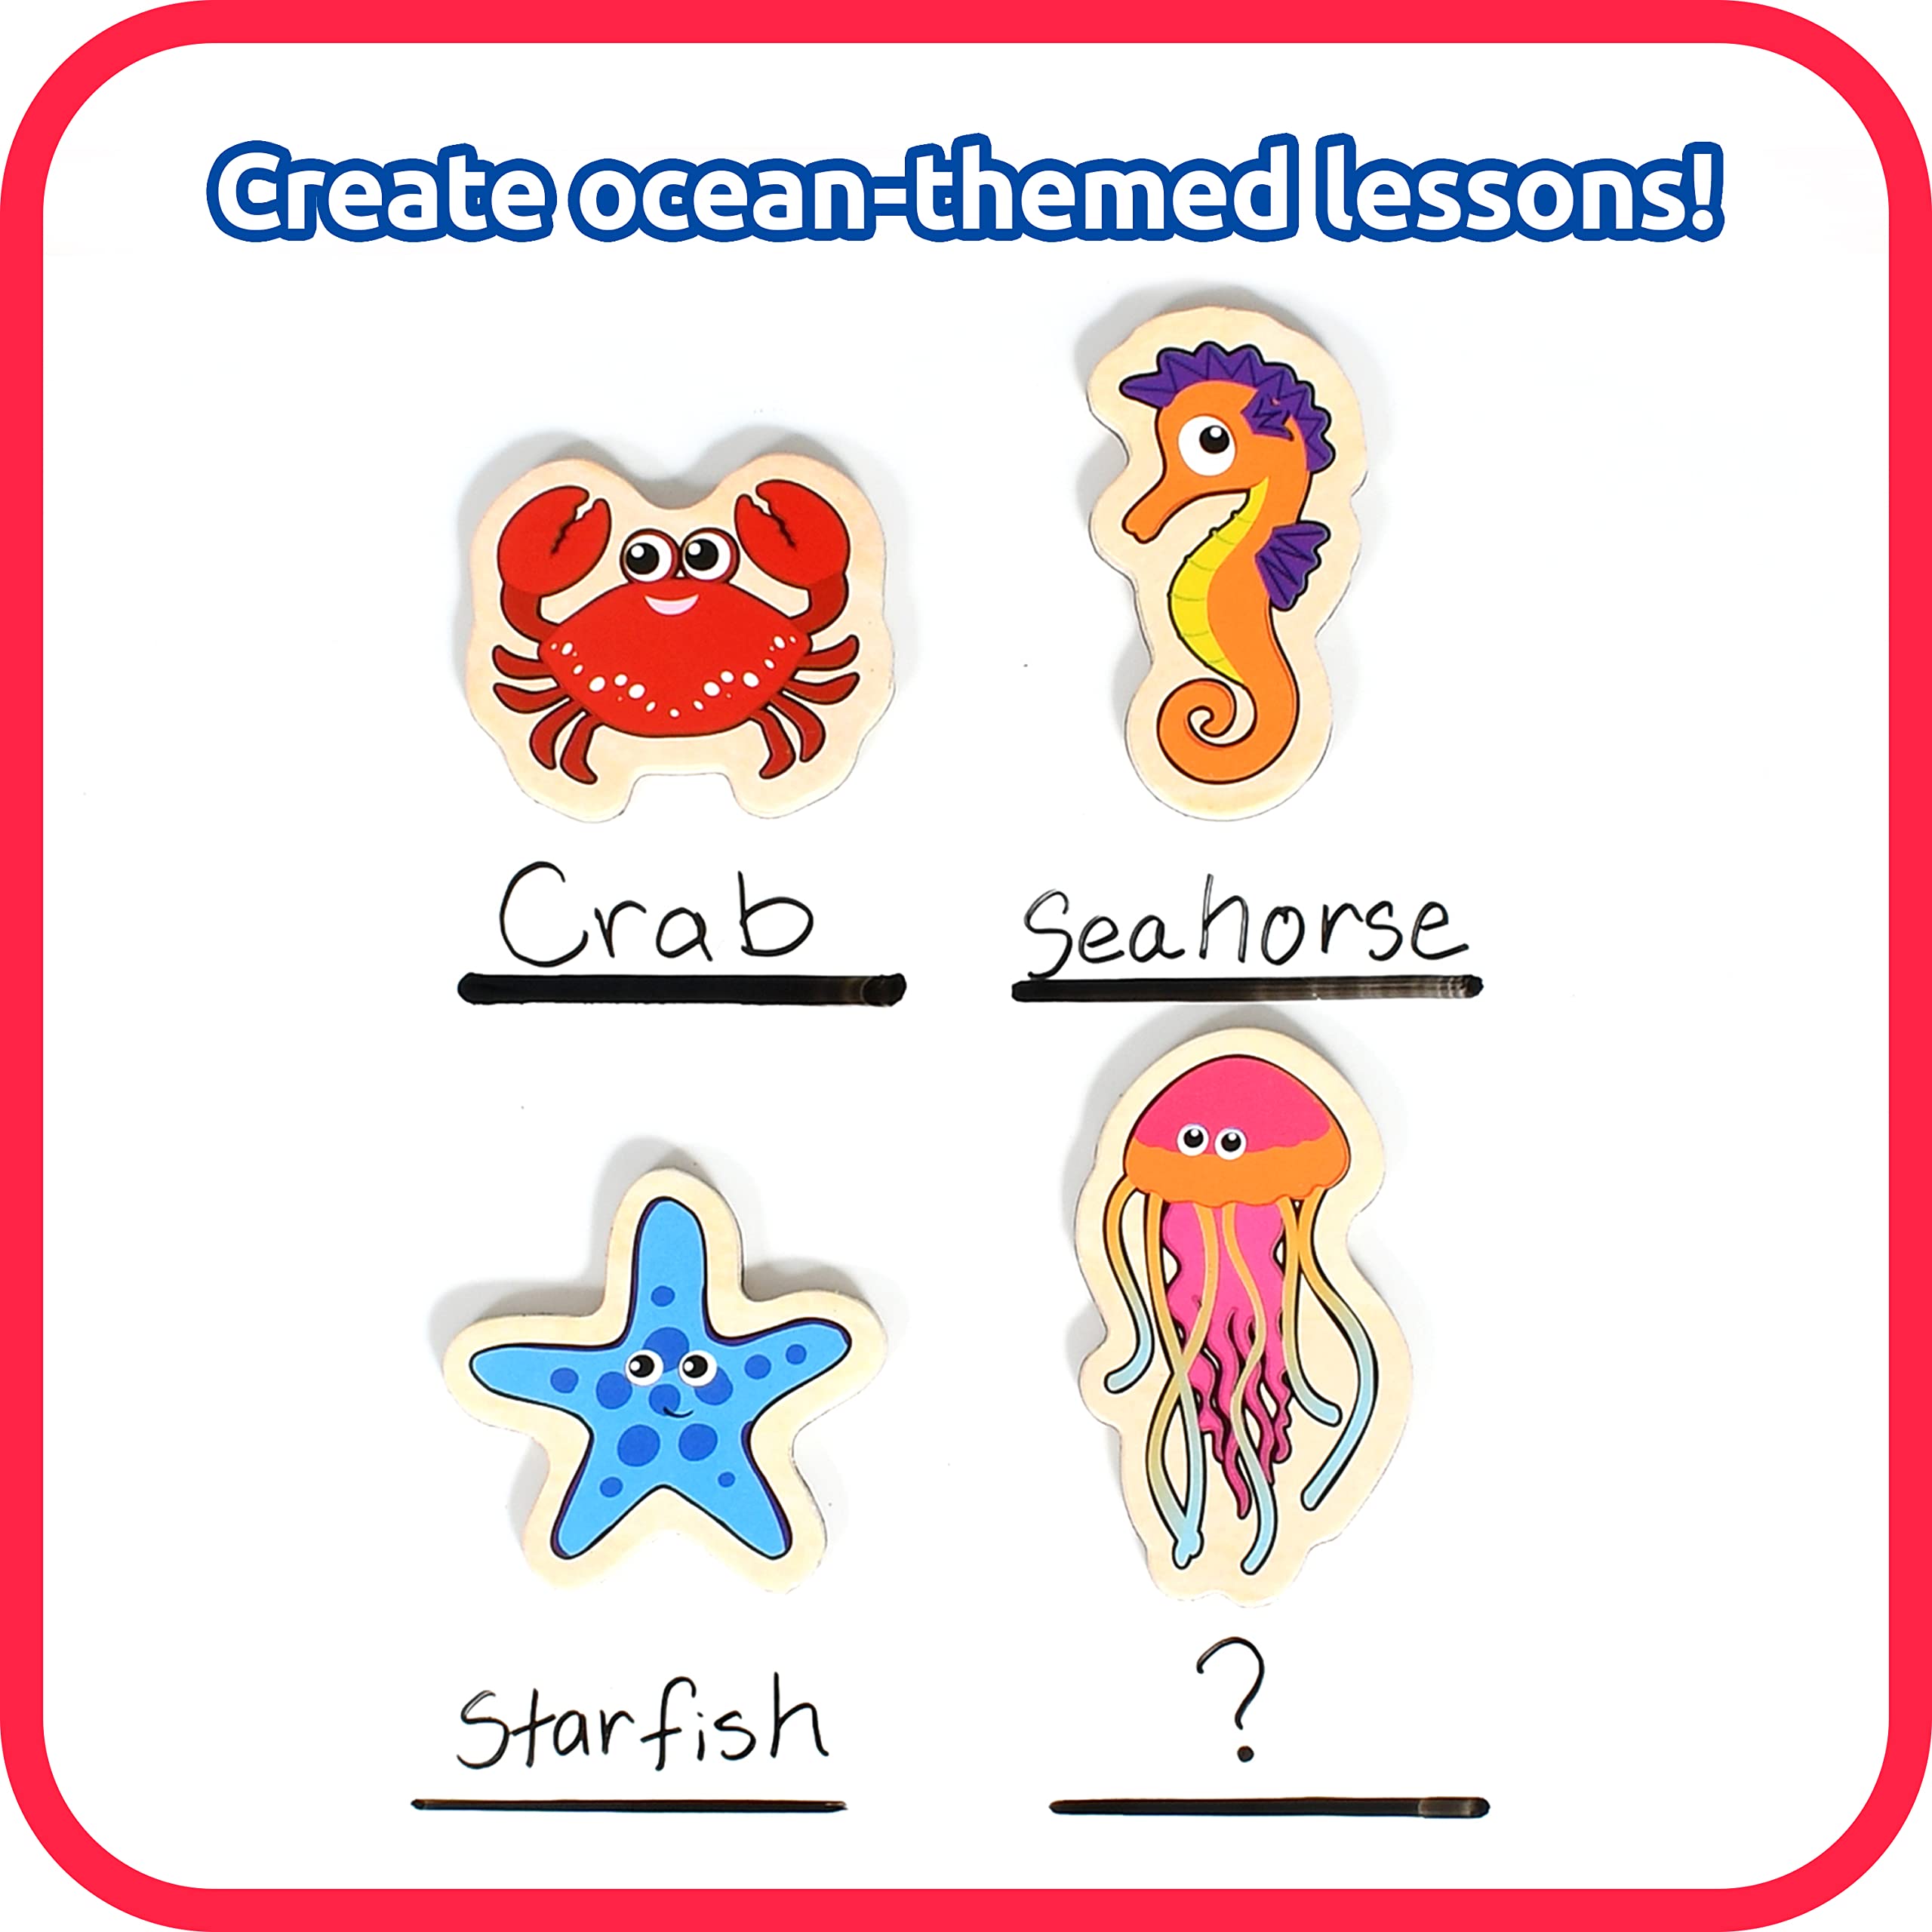 SPARK & WOW Wooden Magnets - Sea Life - Set of 20 - Magnets for Kids Ages 2+ - Cute Animal Magnets for The Fridge, Whiteboards and More